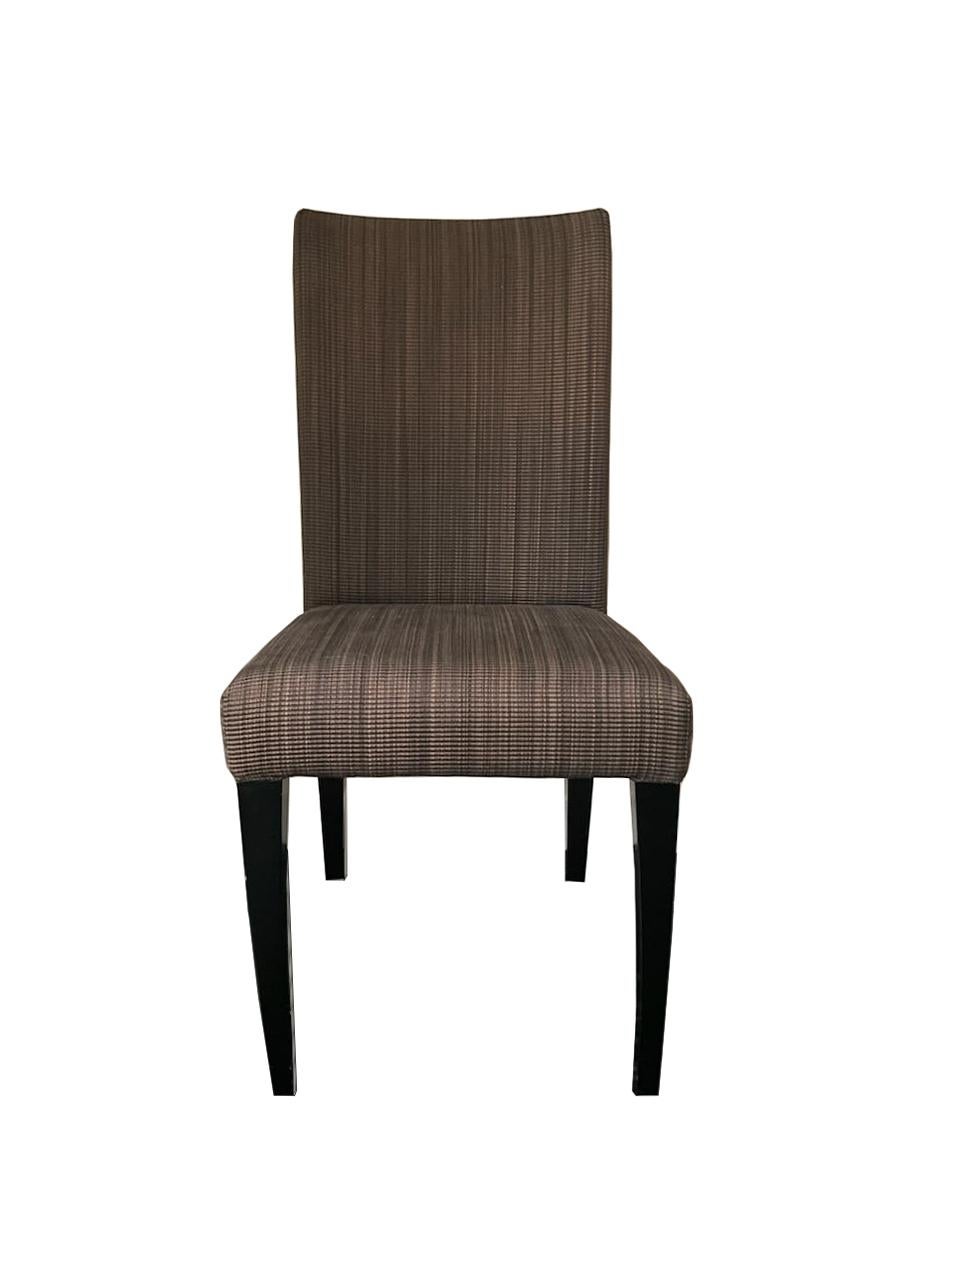 i4 Mariani for Pace Collection
Set of 6 Side Chairs

Made in Italy by i4 Mariani, linear tweed fabrication in multiple shades of warm grayish-taupe fabric upholstery over black ebonized gloss wooden legs. A streamlined modern body with tapered